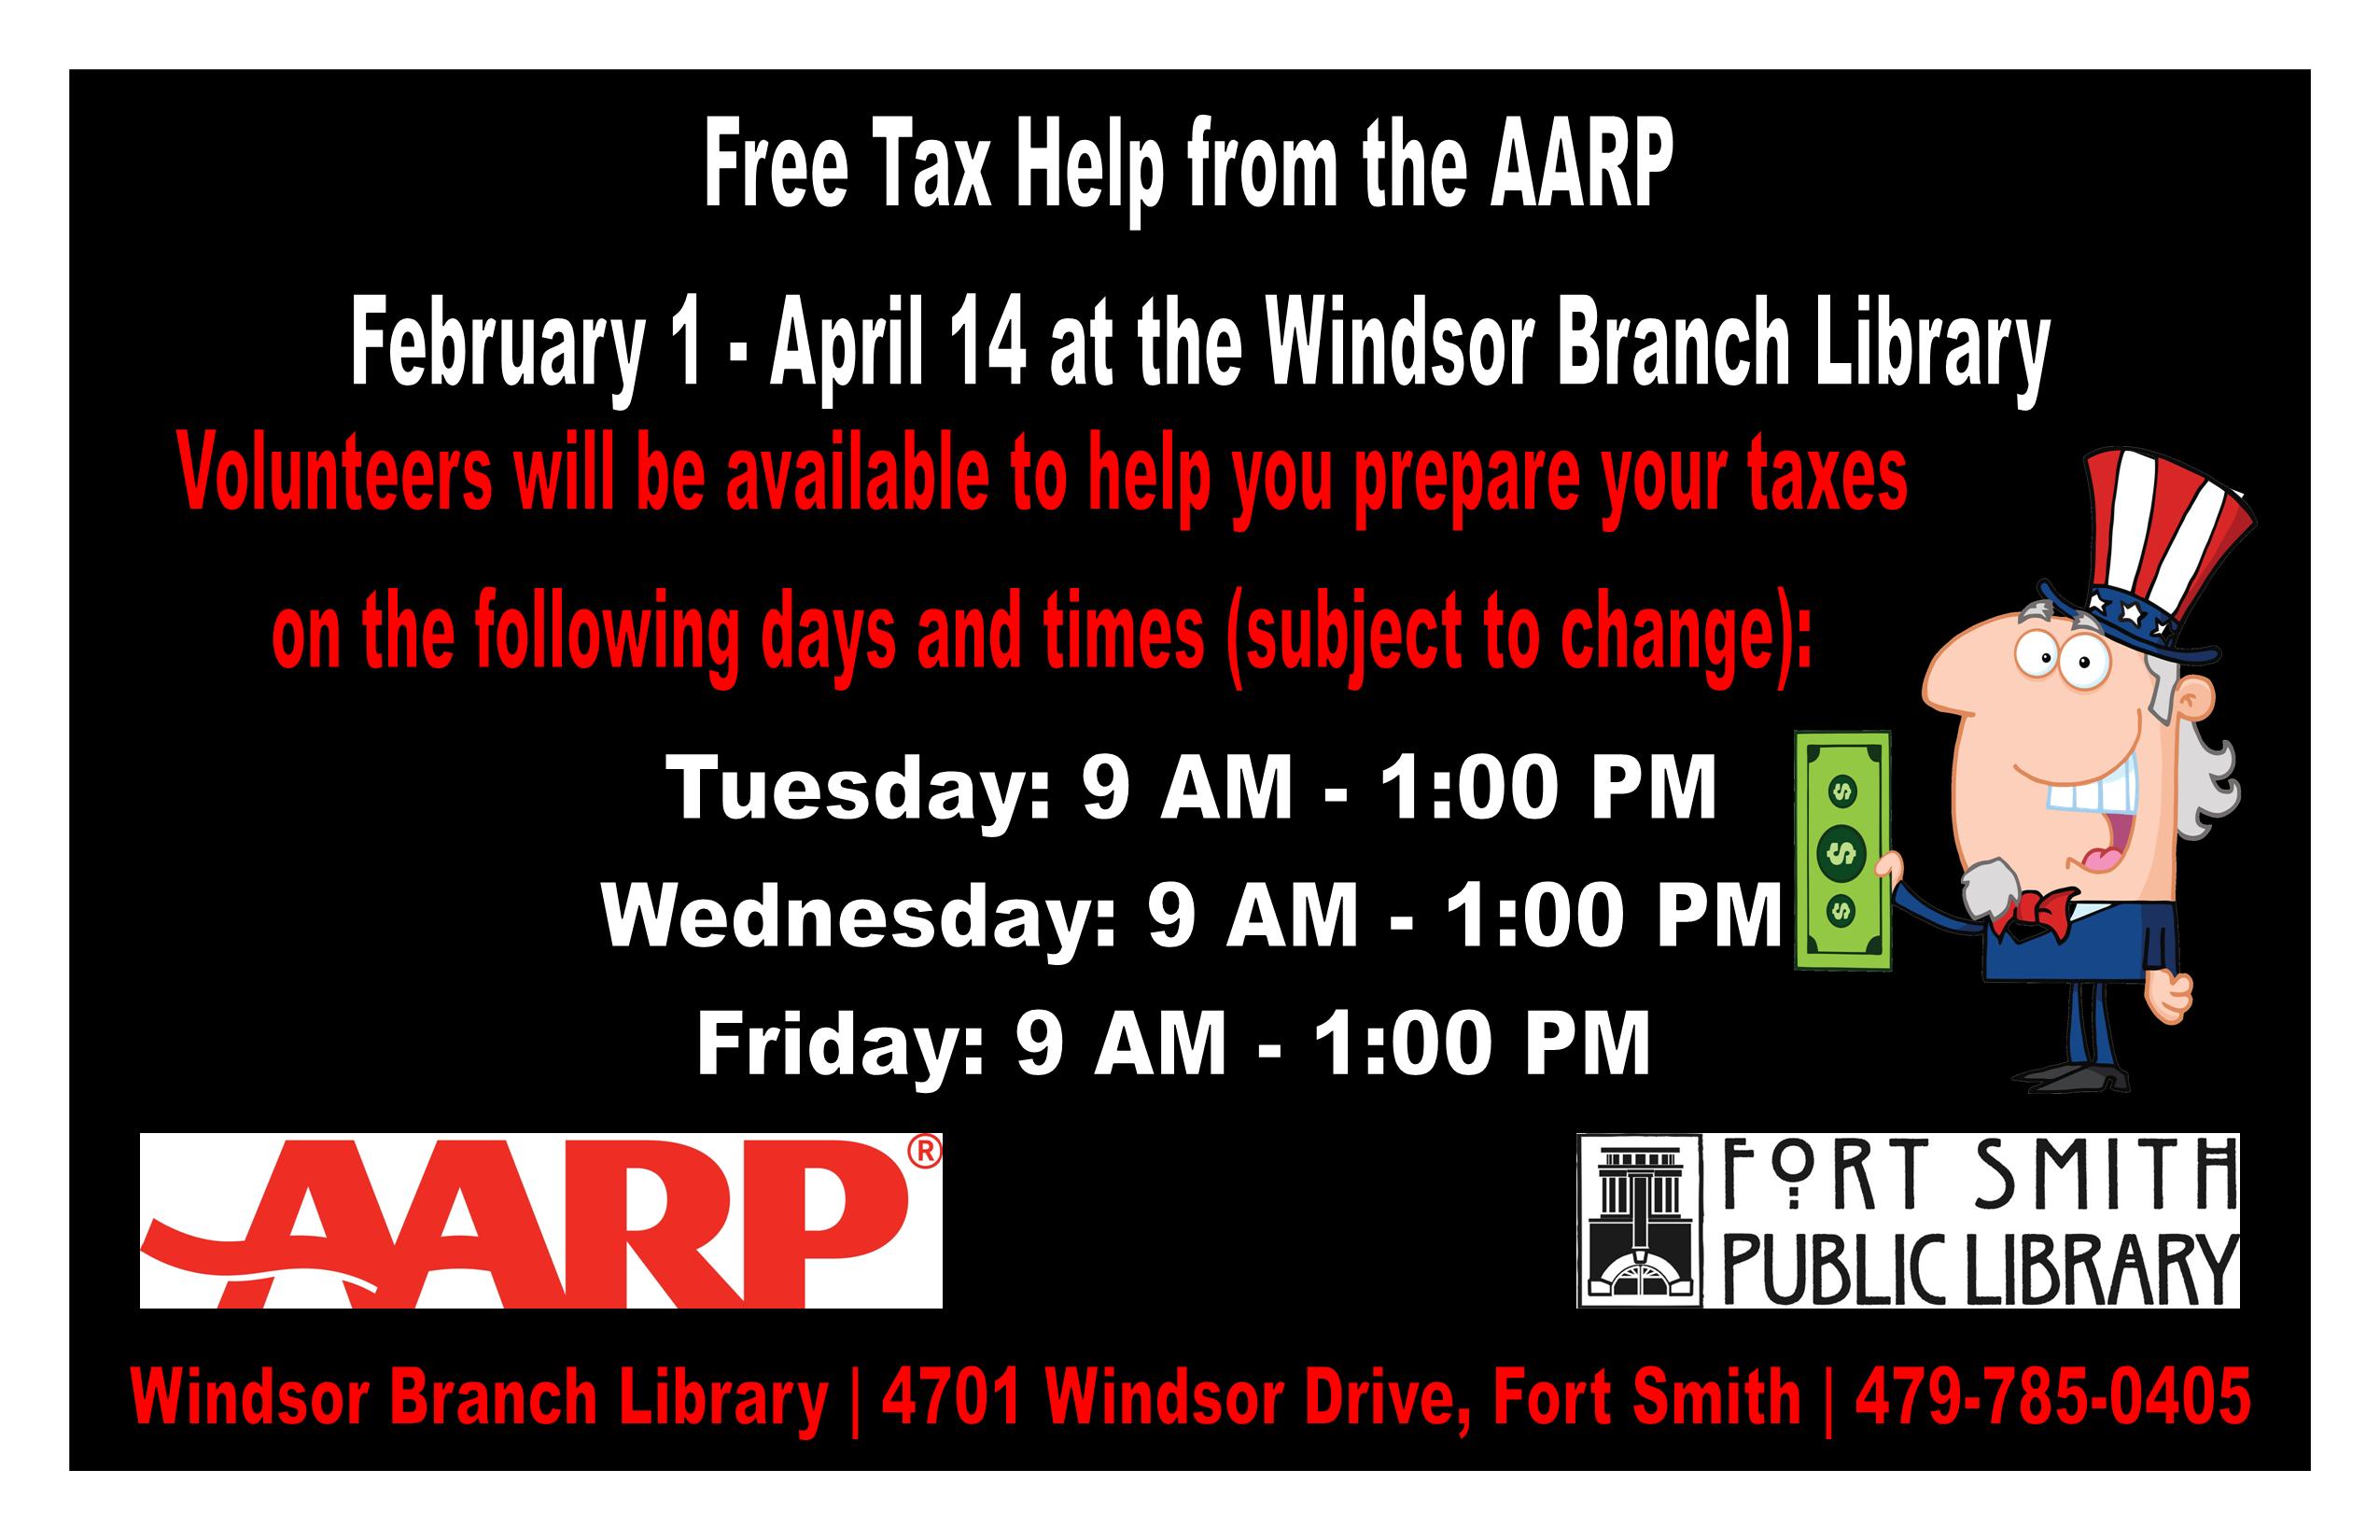 Free Tax Help from the AARP